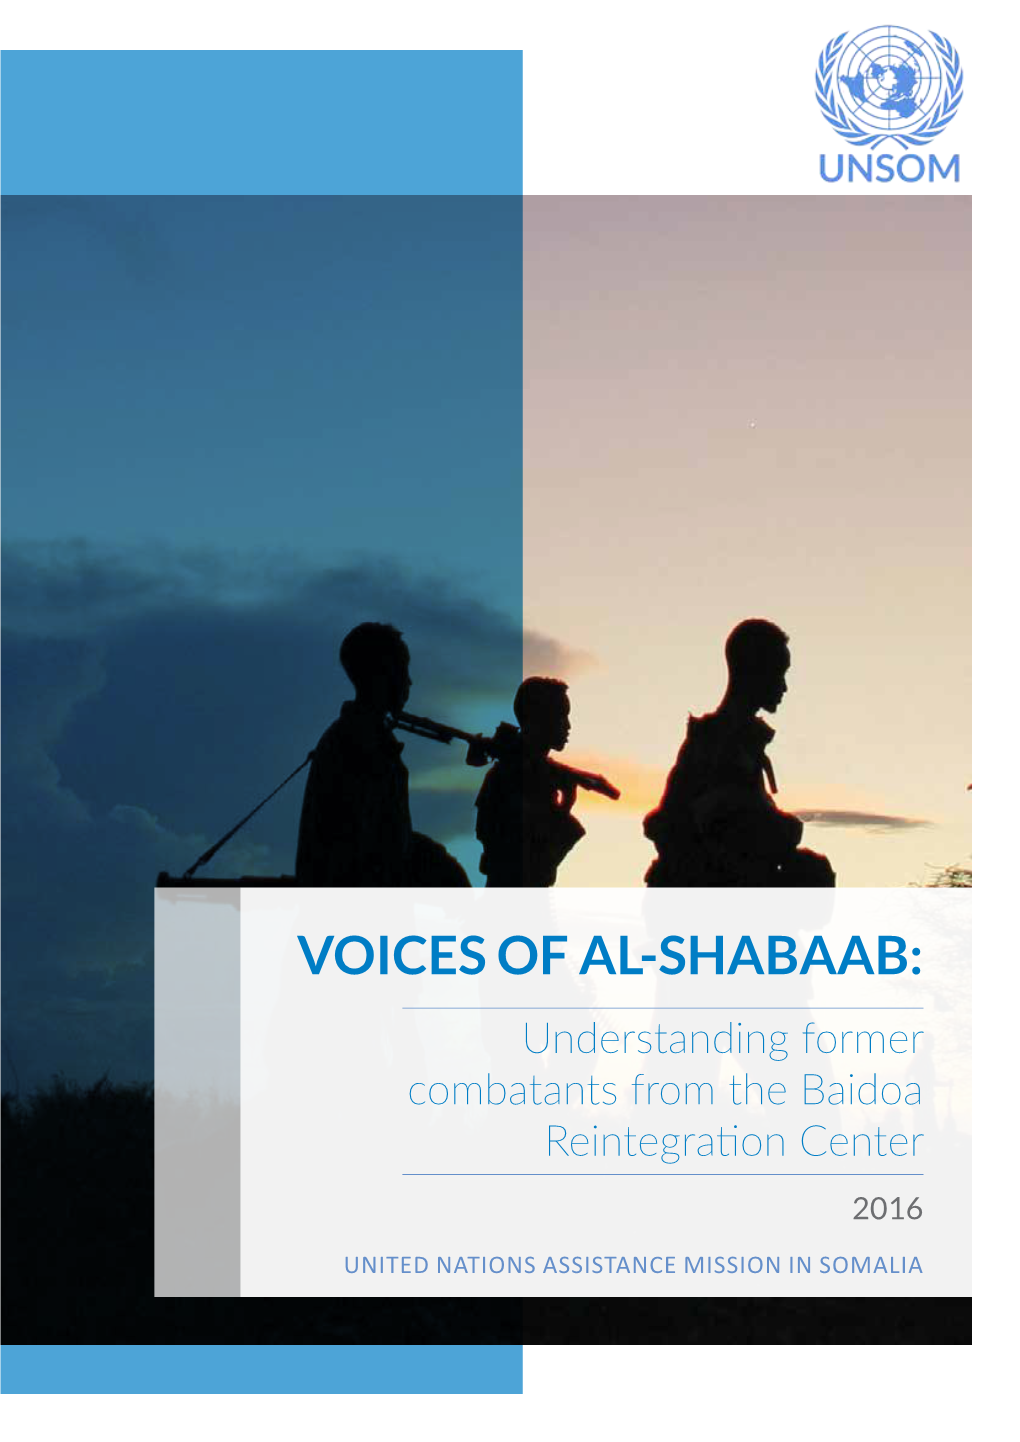 VOICES of AL-SHABAAB: Understanding Former Combatants from the Baidoa Reintegration Center 2016